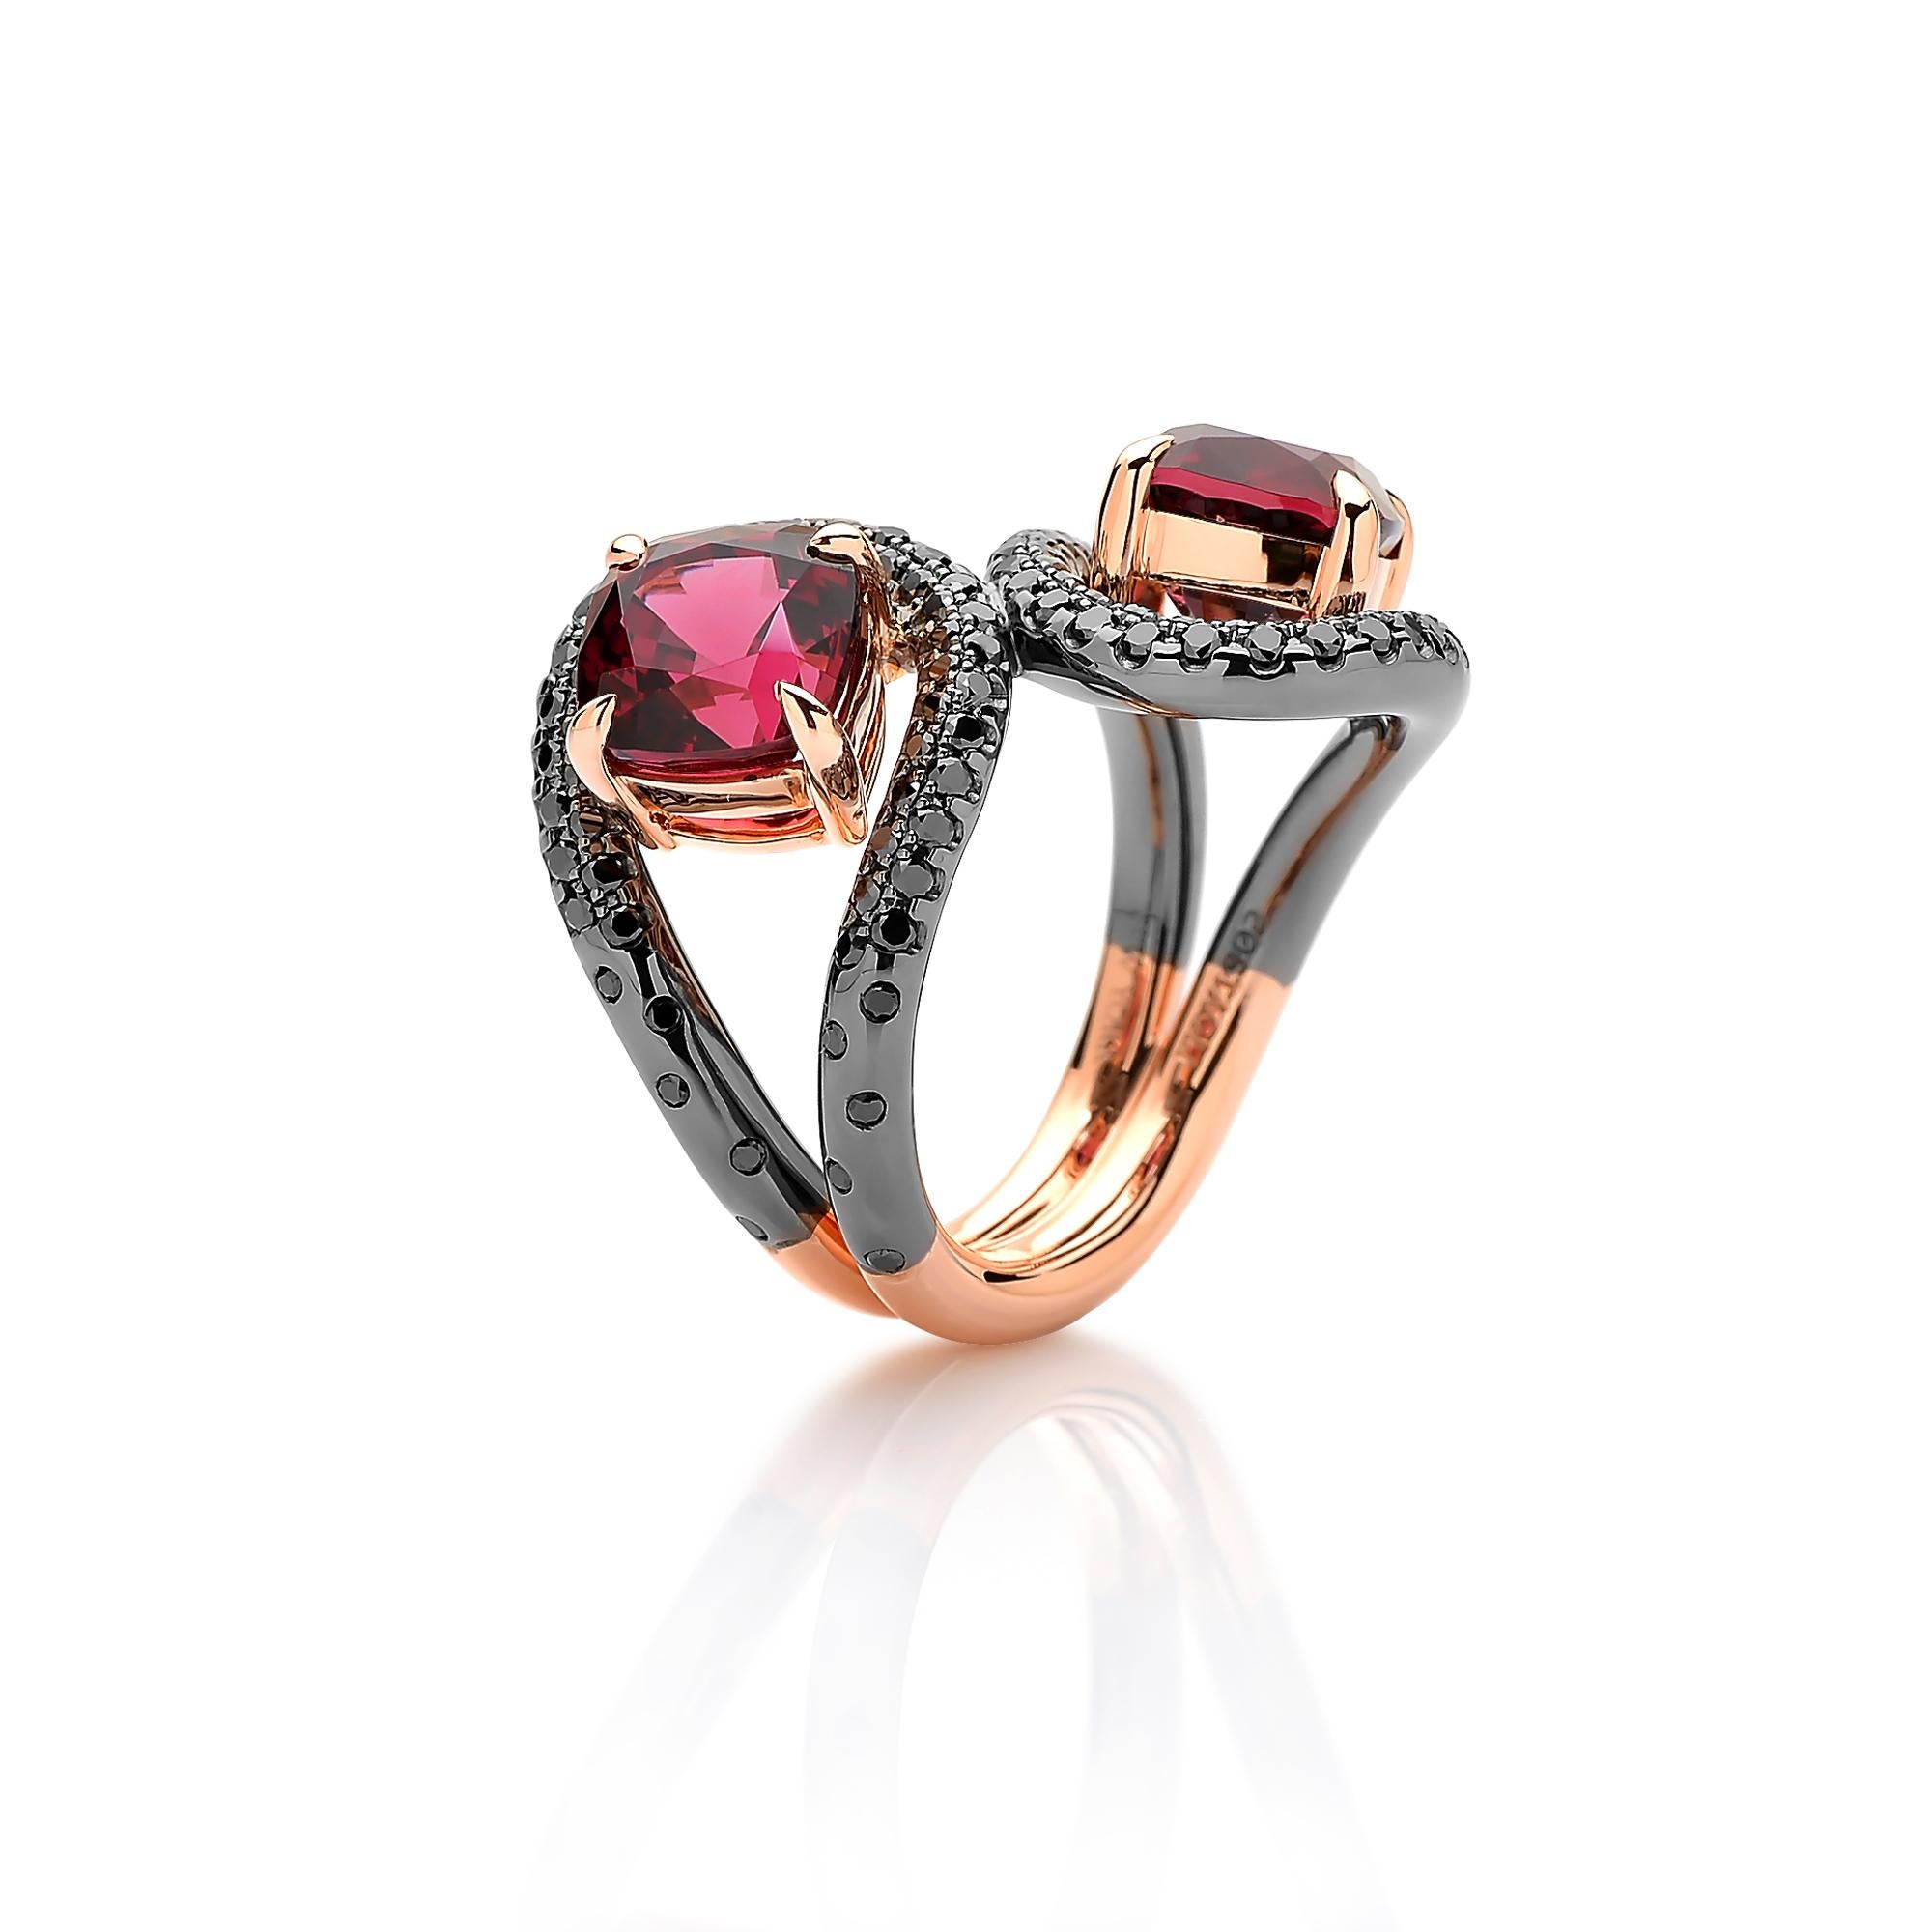 From the 'Intrecci' Collection, one-of-a-kind double cushion cut garnet ring set in 18 karat rose gold with black rhodium finish and pave-set black diamond detailing. 

The beauty is in the details - from the combination of hues, the cut of the